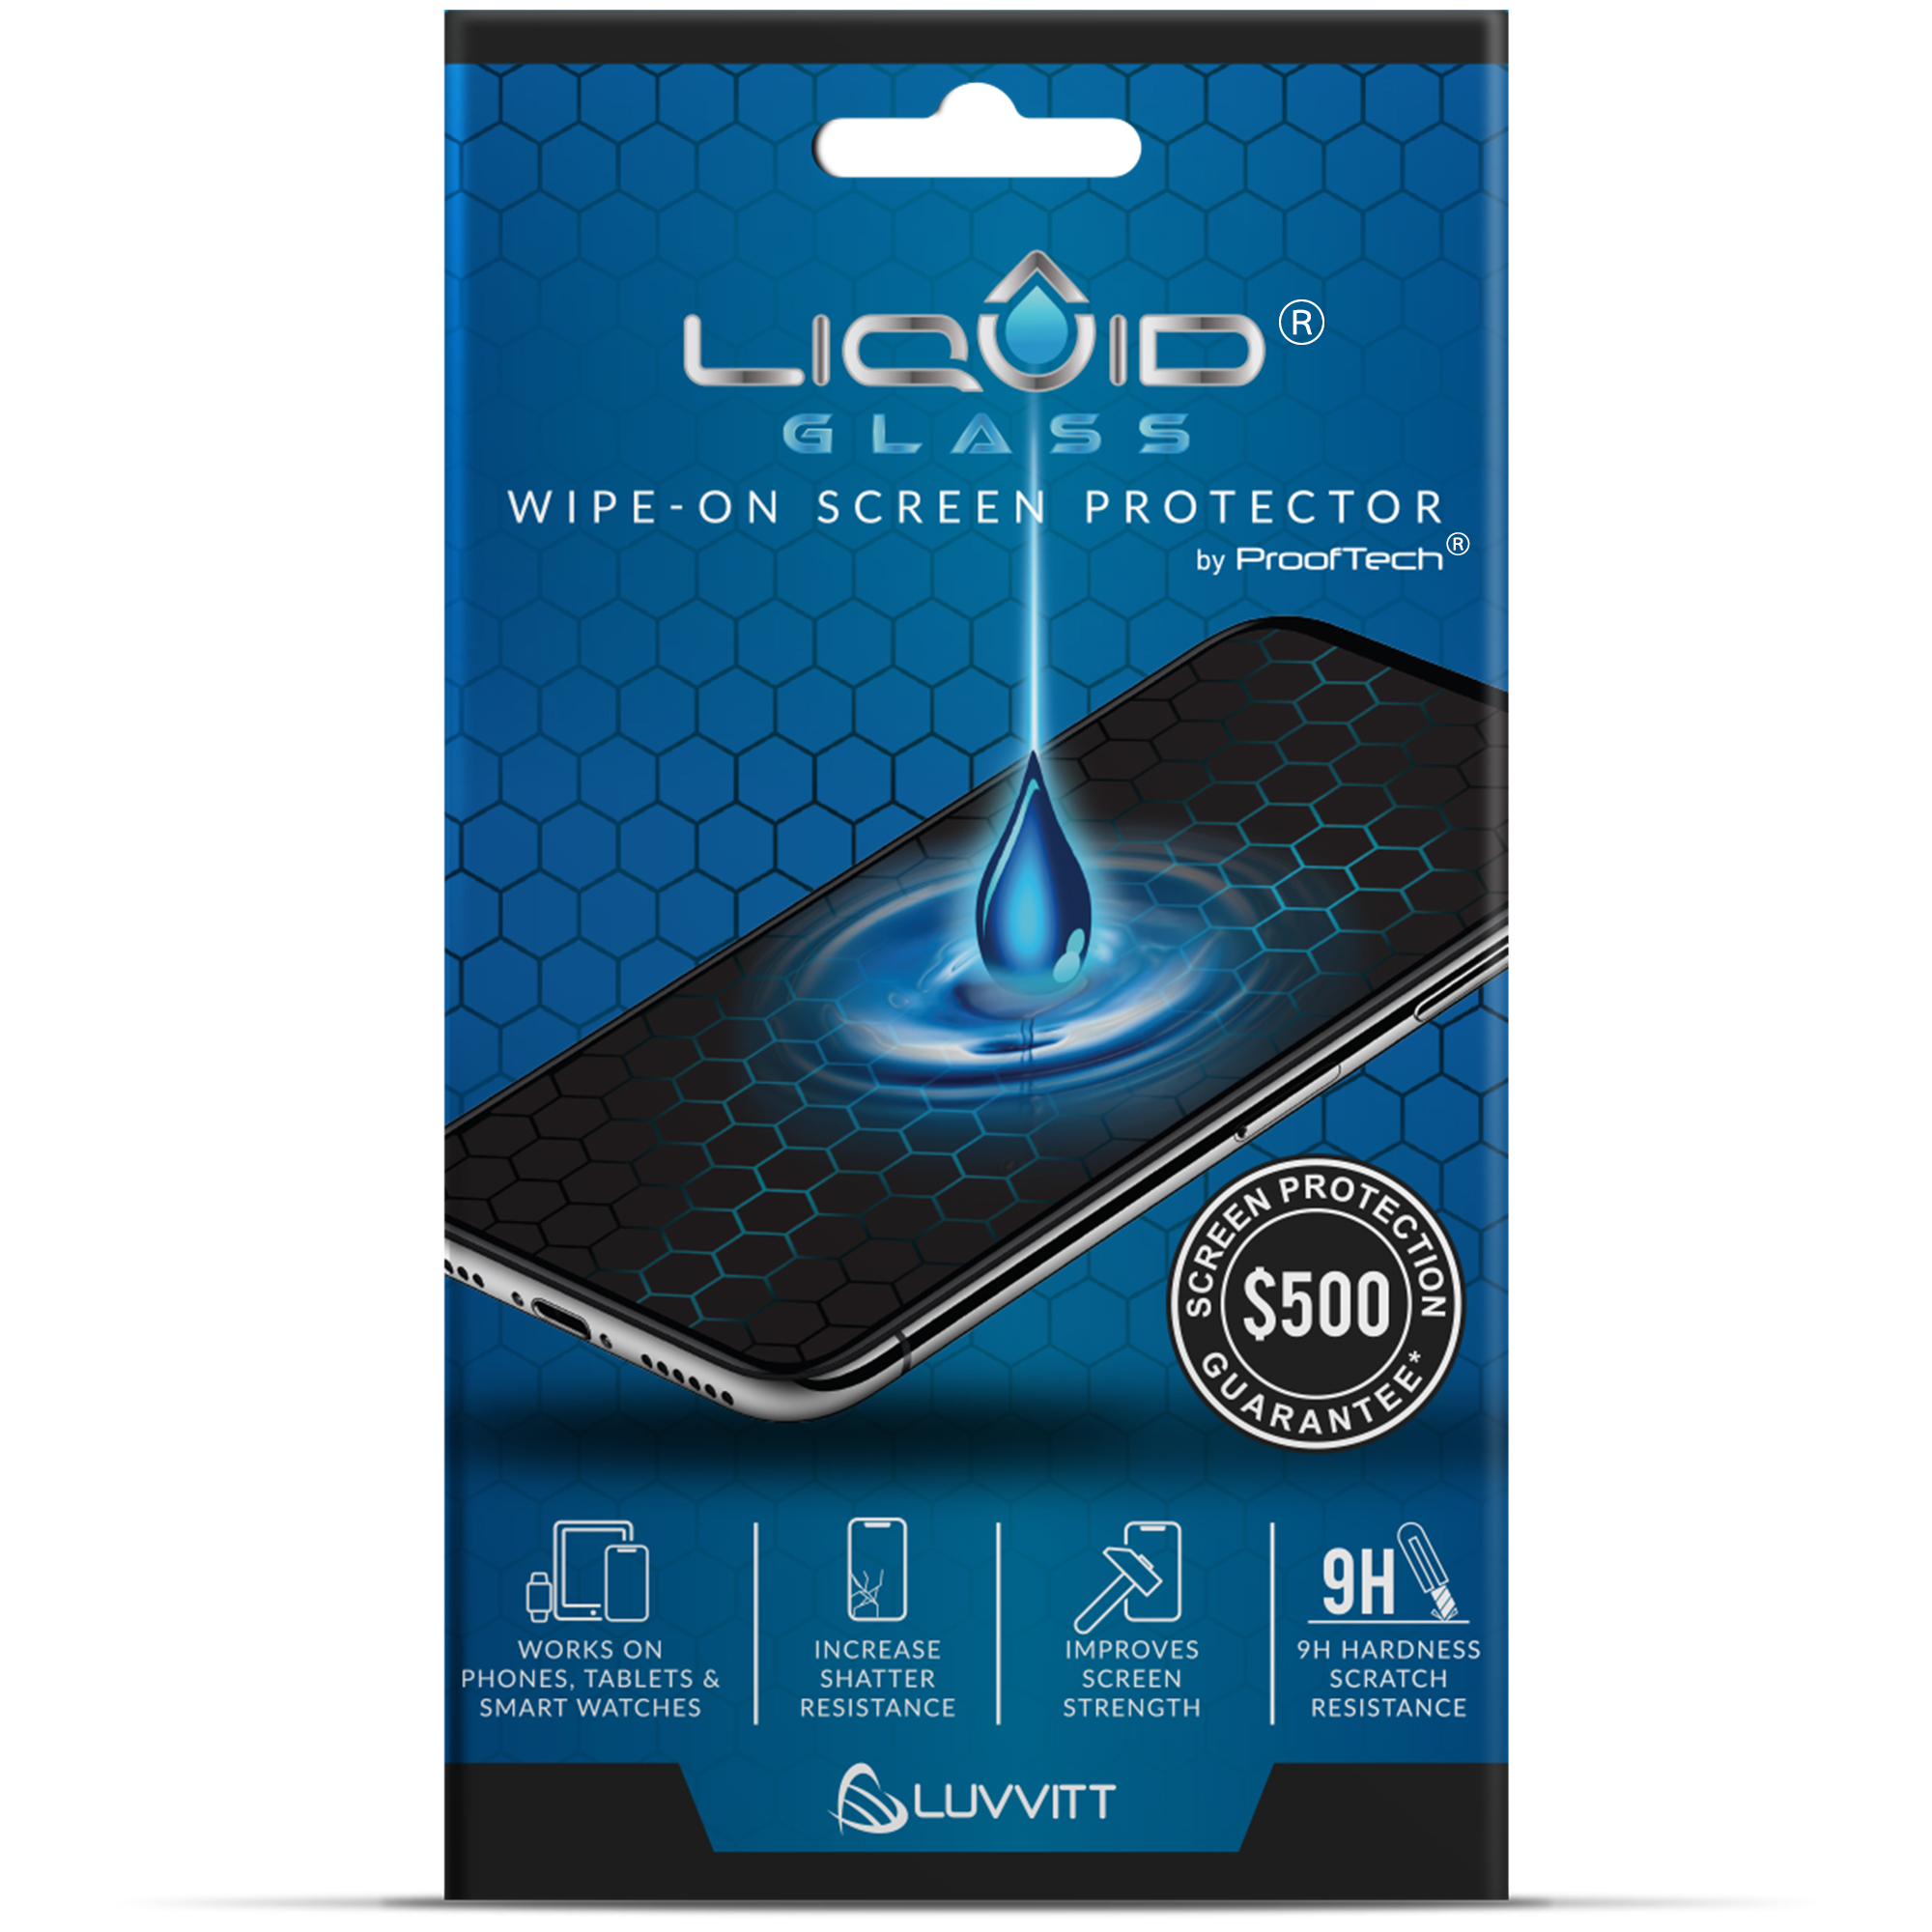 Liquid Glass Screen Protector with $500 Guarantee for All Phones Tablets and Smart Watches